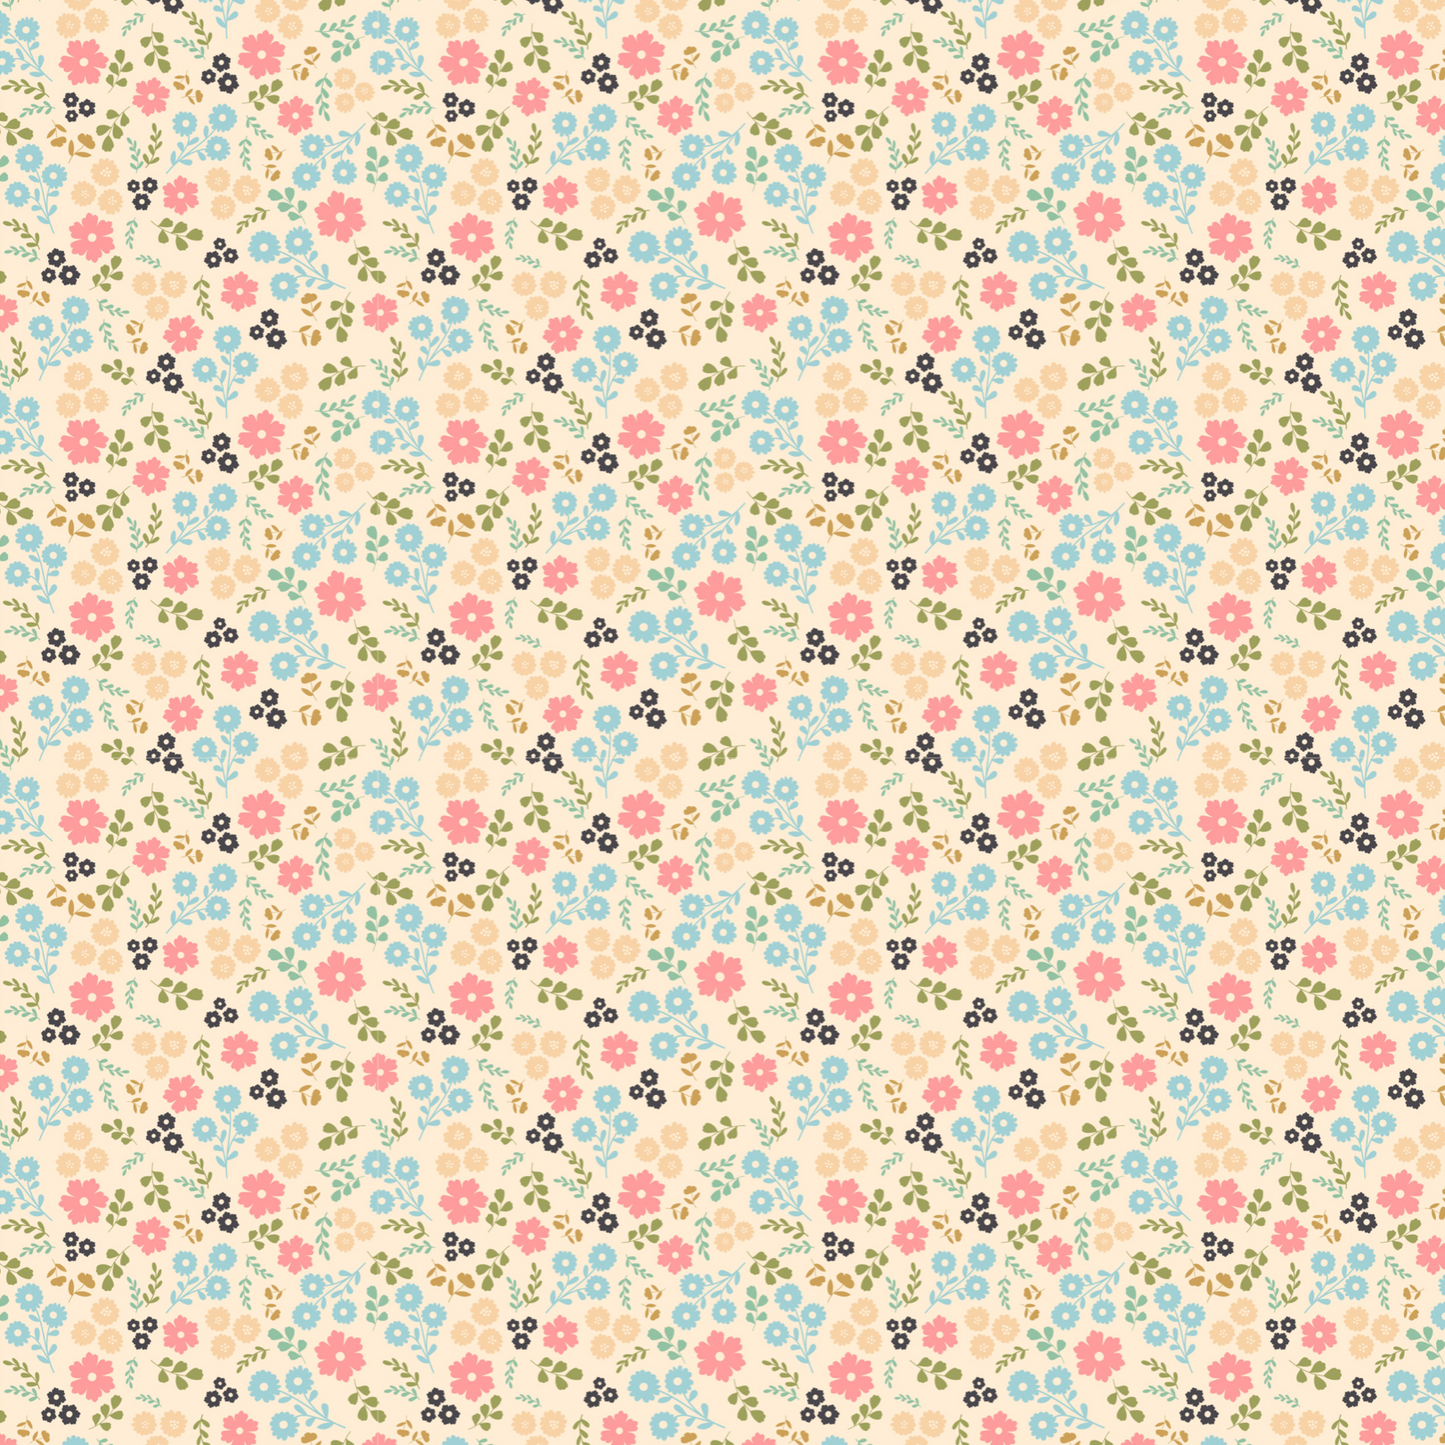 Poppies Patchwork Club, Jemima Cream PP23607, sold by the 1/2 yard